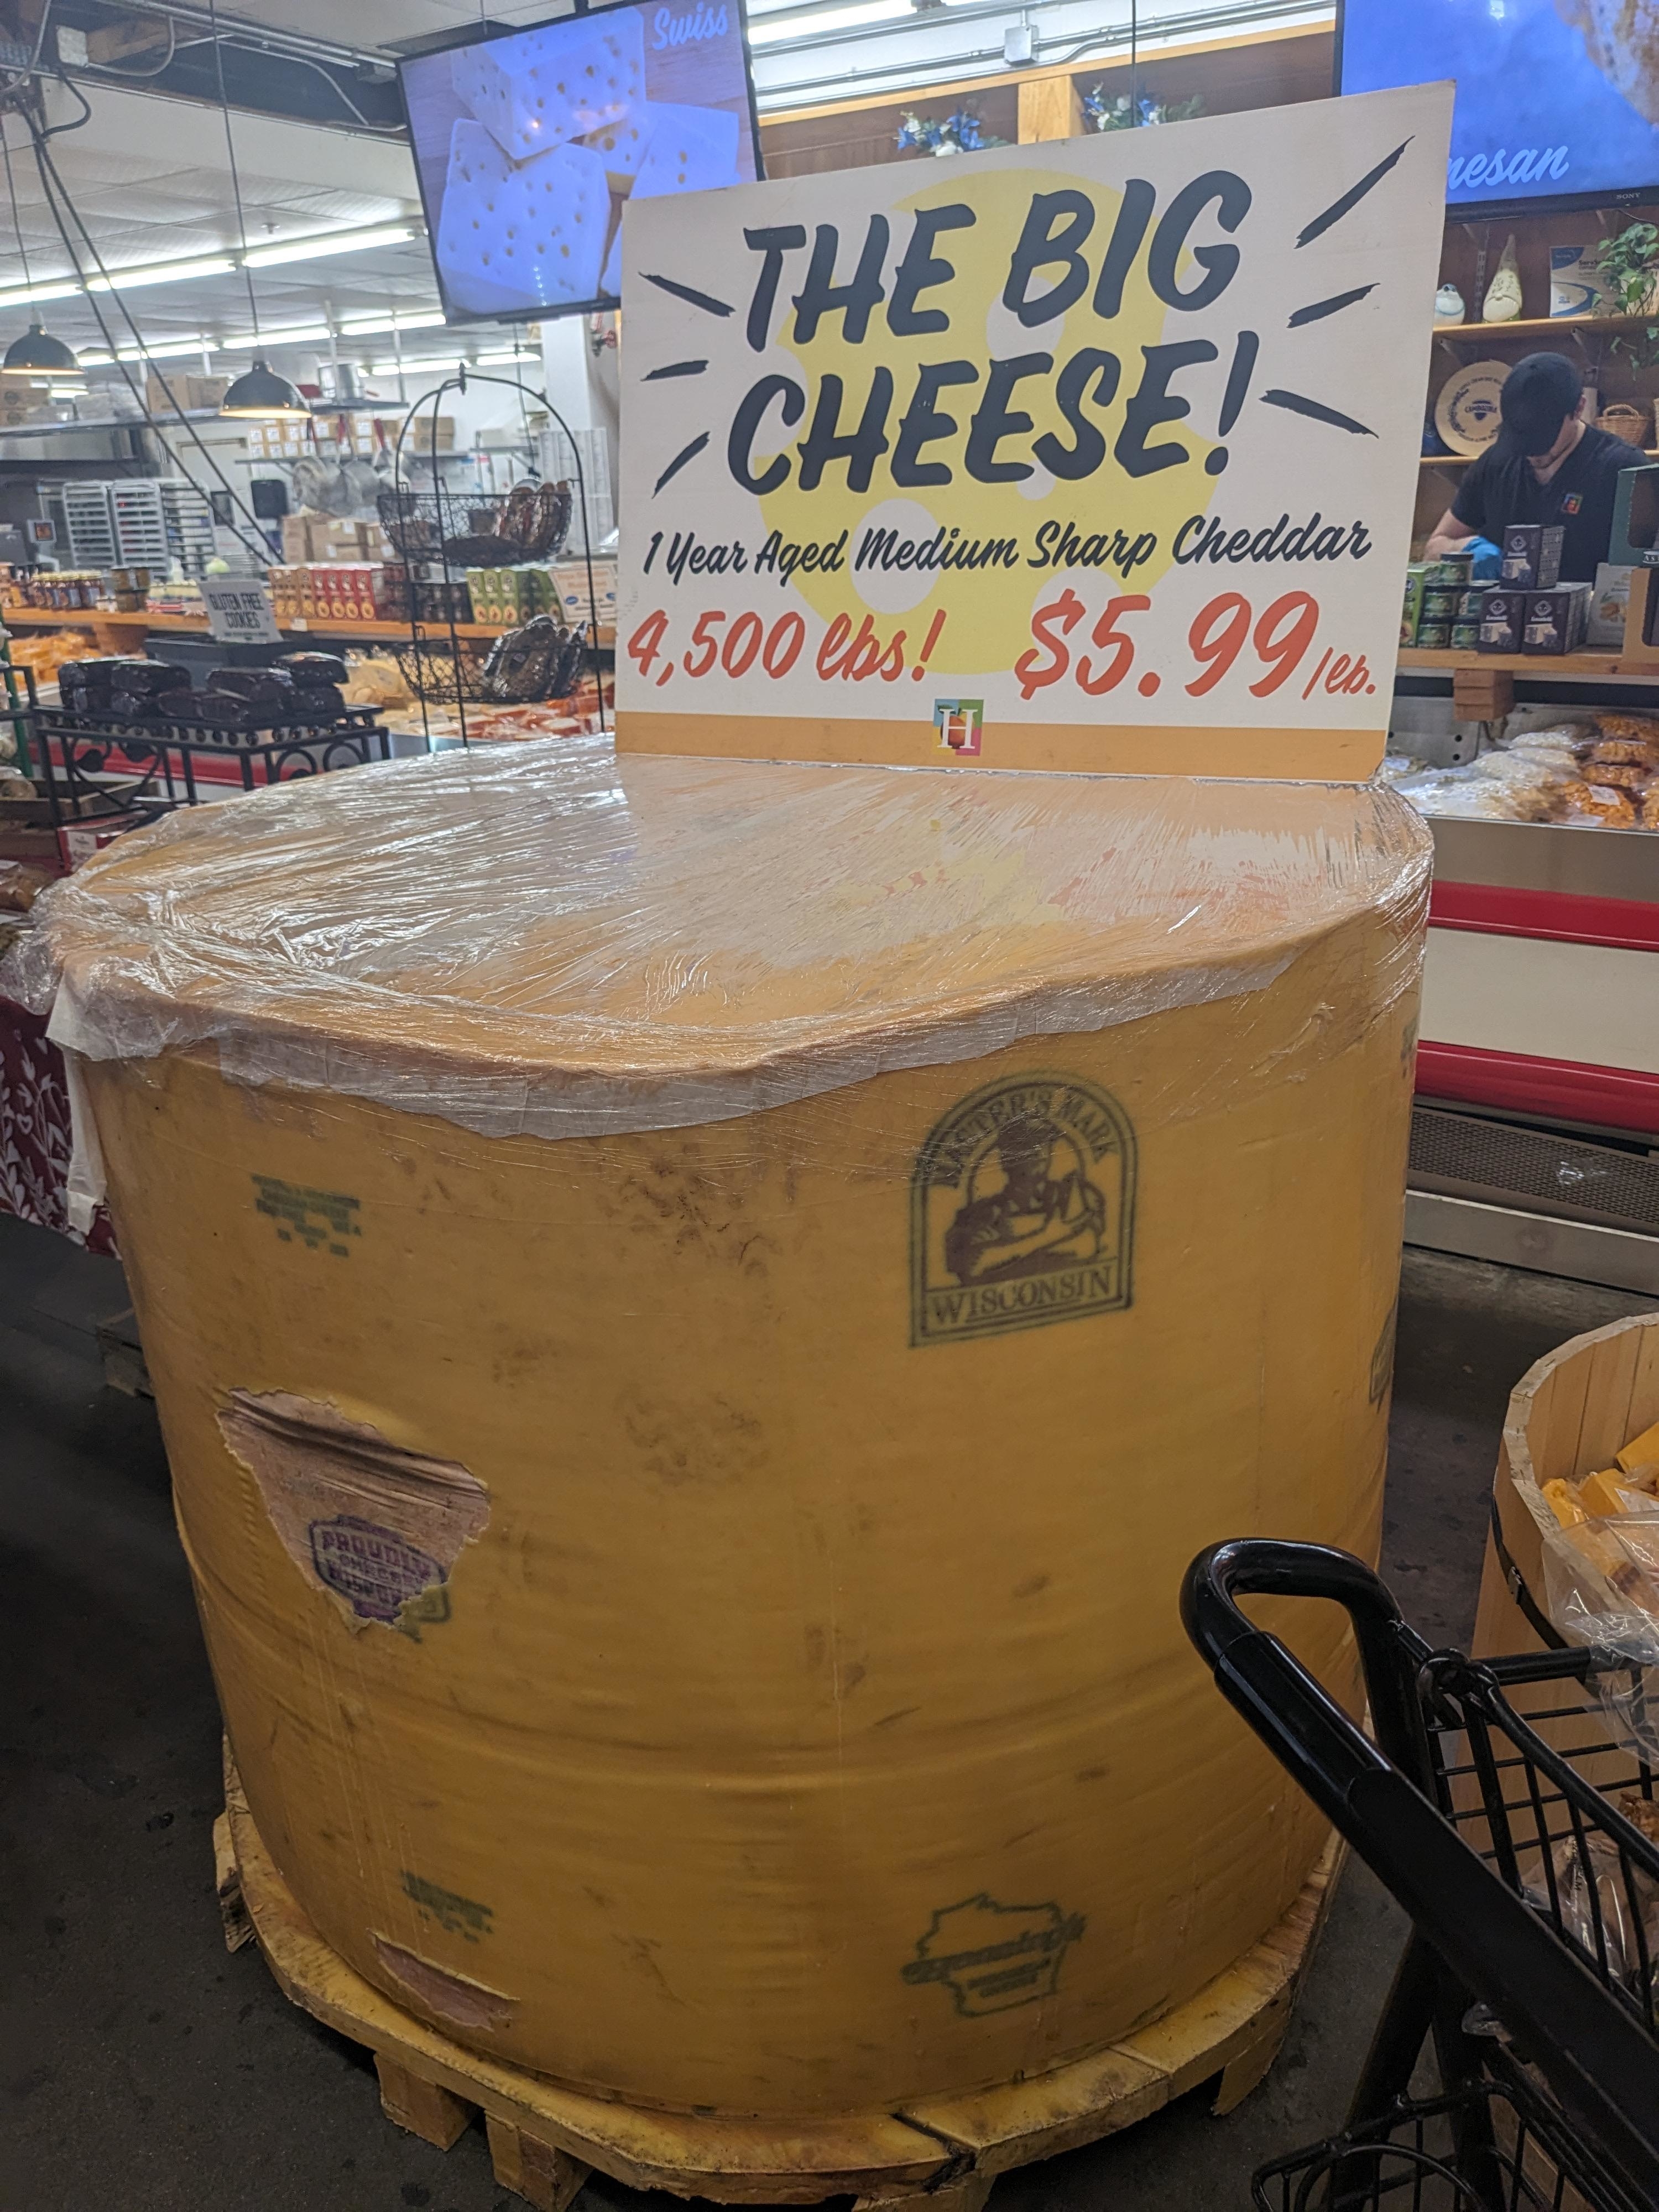 Giant wheel of cheddar cheese for sale at $5.99/lb, labeled &quot;THE BIG CHEESE,&quot; weighing 4,500 lbs